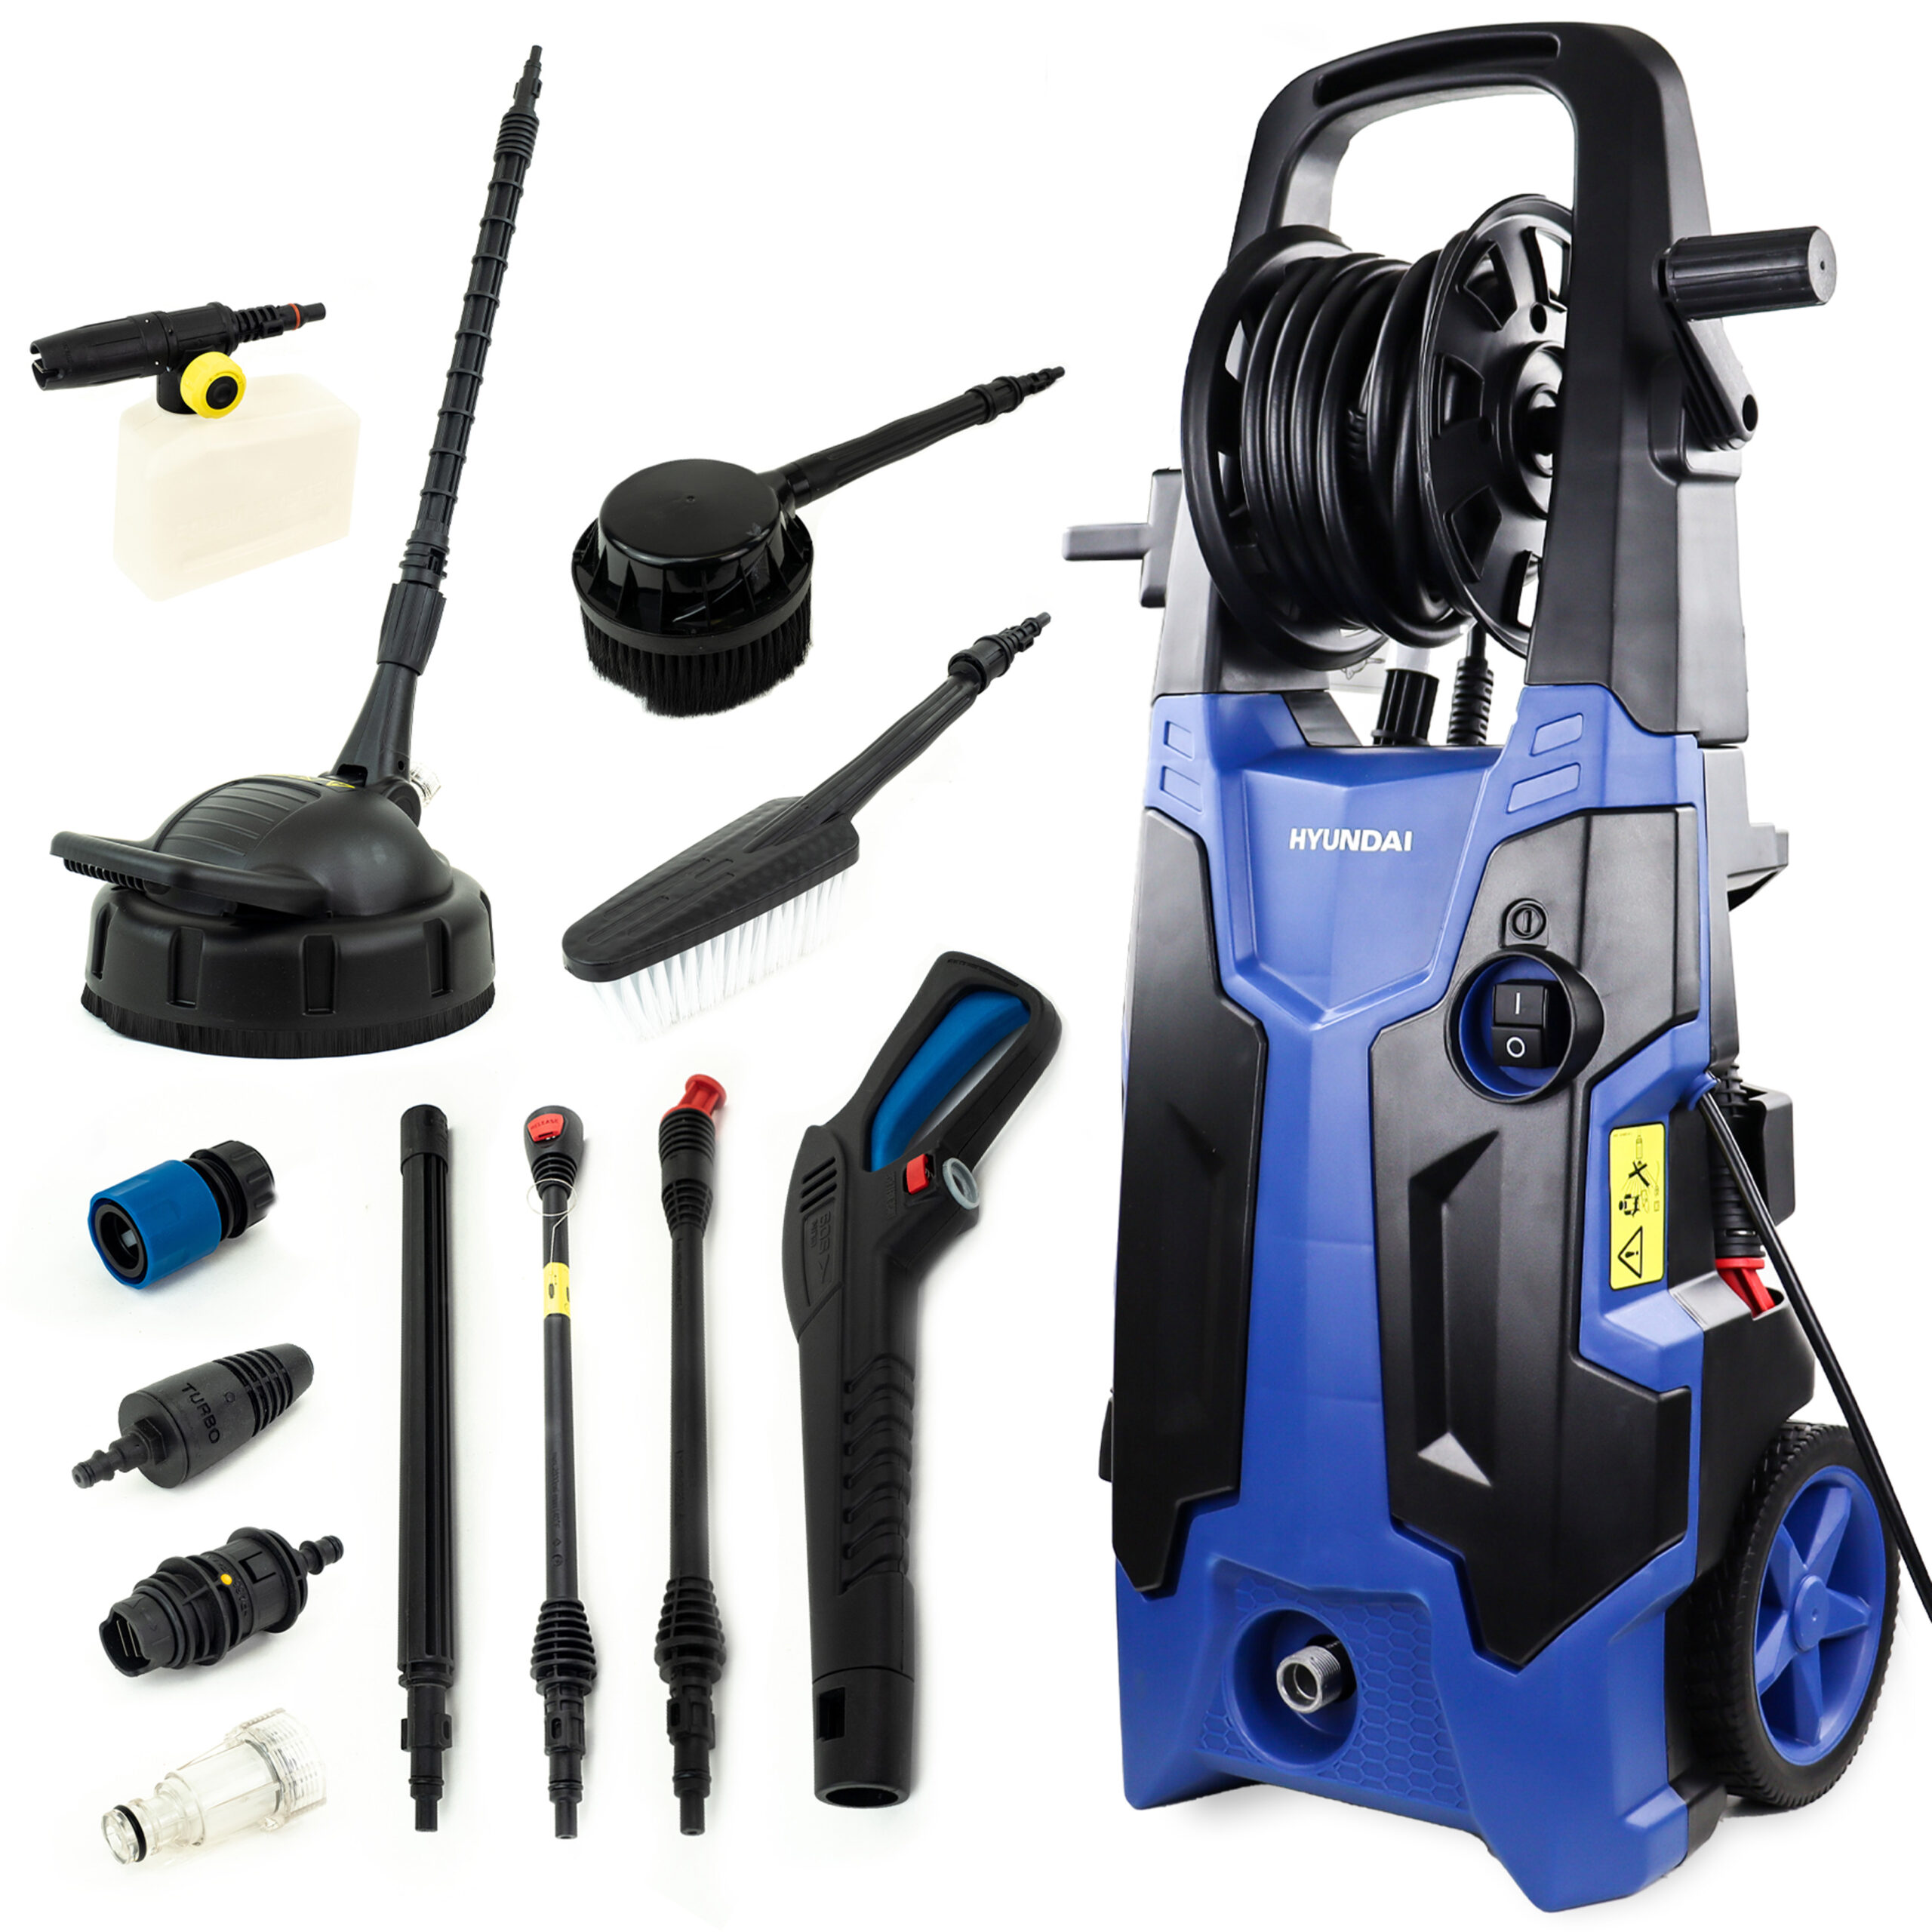 UK Suppliers Hyundai 2500W 2610psi 180bar Electric Pressure Washer With 8.5L/Min Flow Rate 